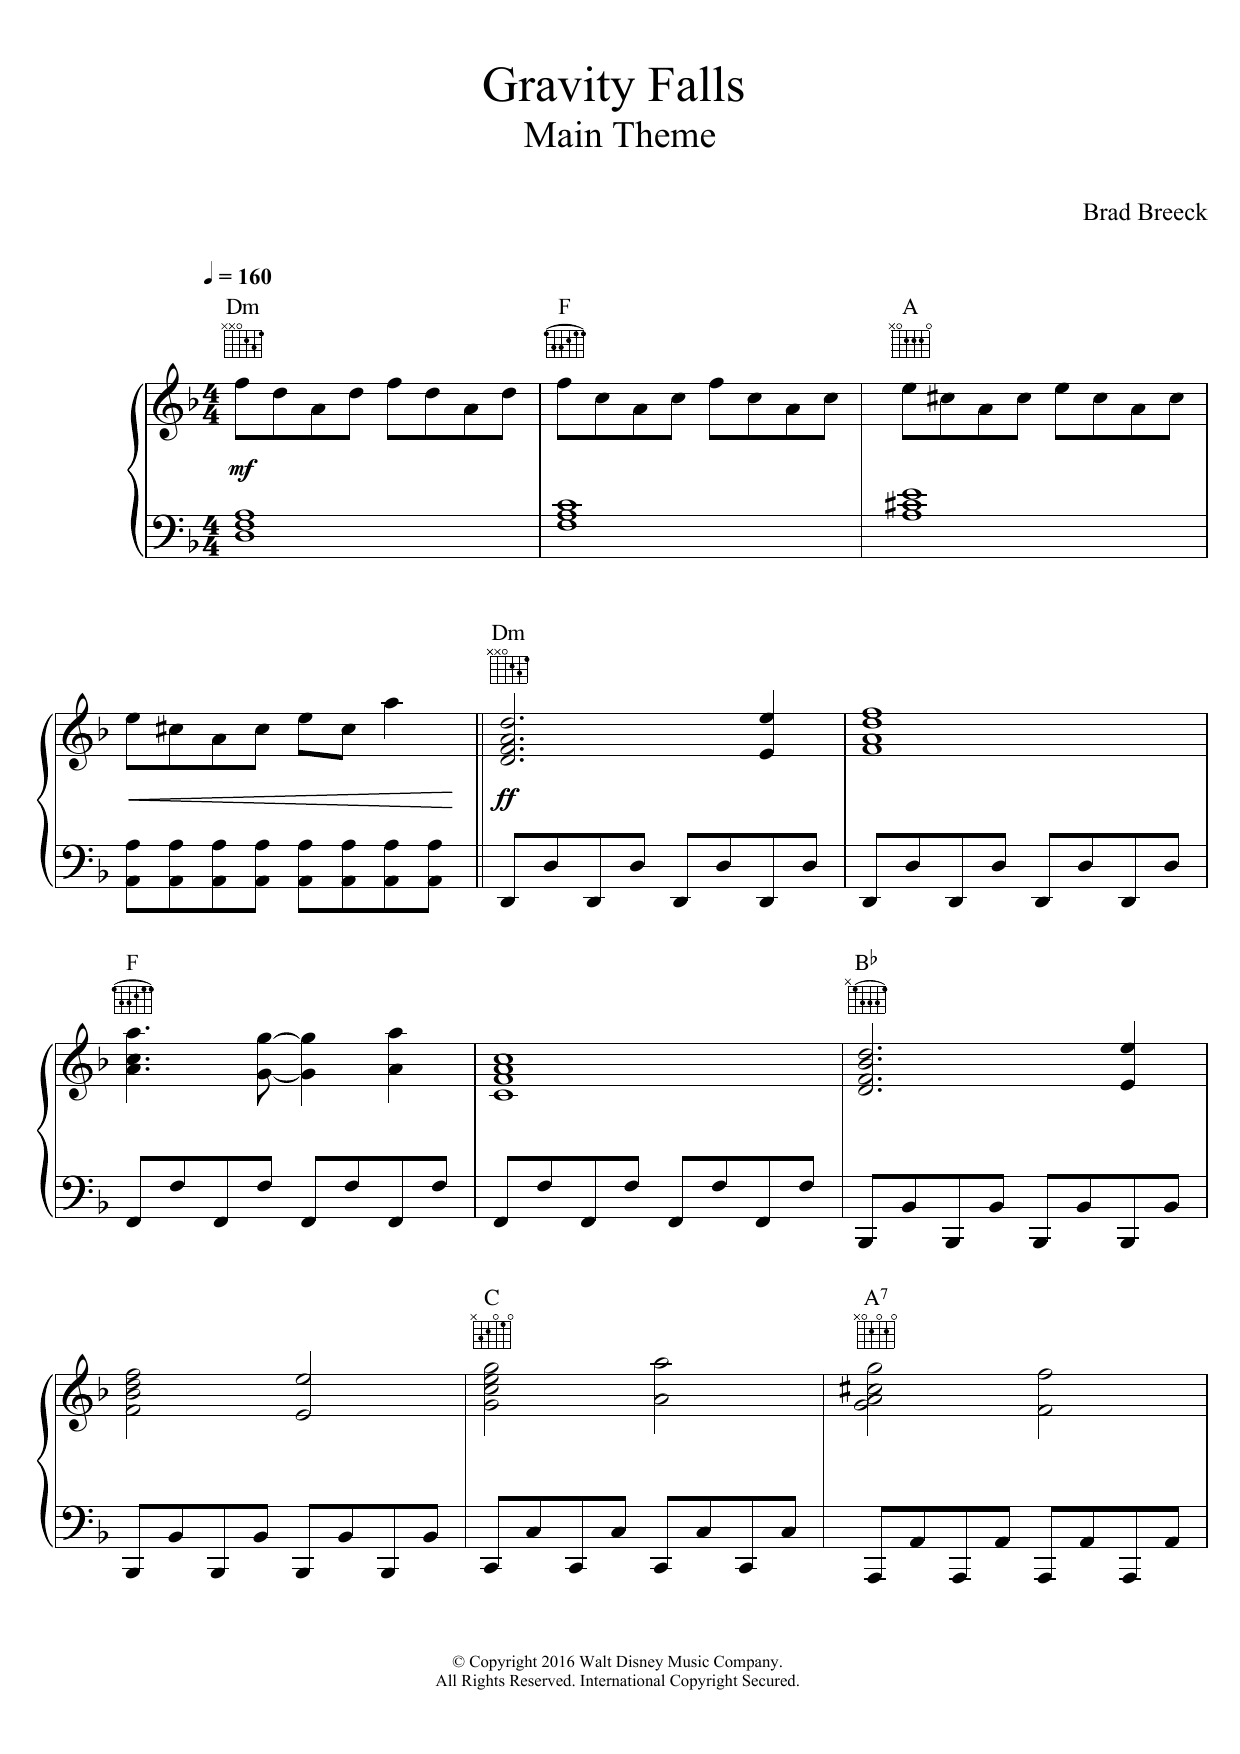 Gravity Falls Main Theme Sheet Music By Brad Breeck For Solo Noteflight Marketplace